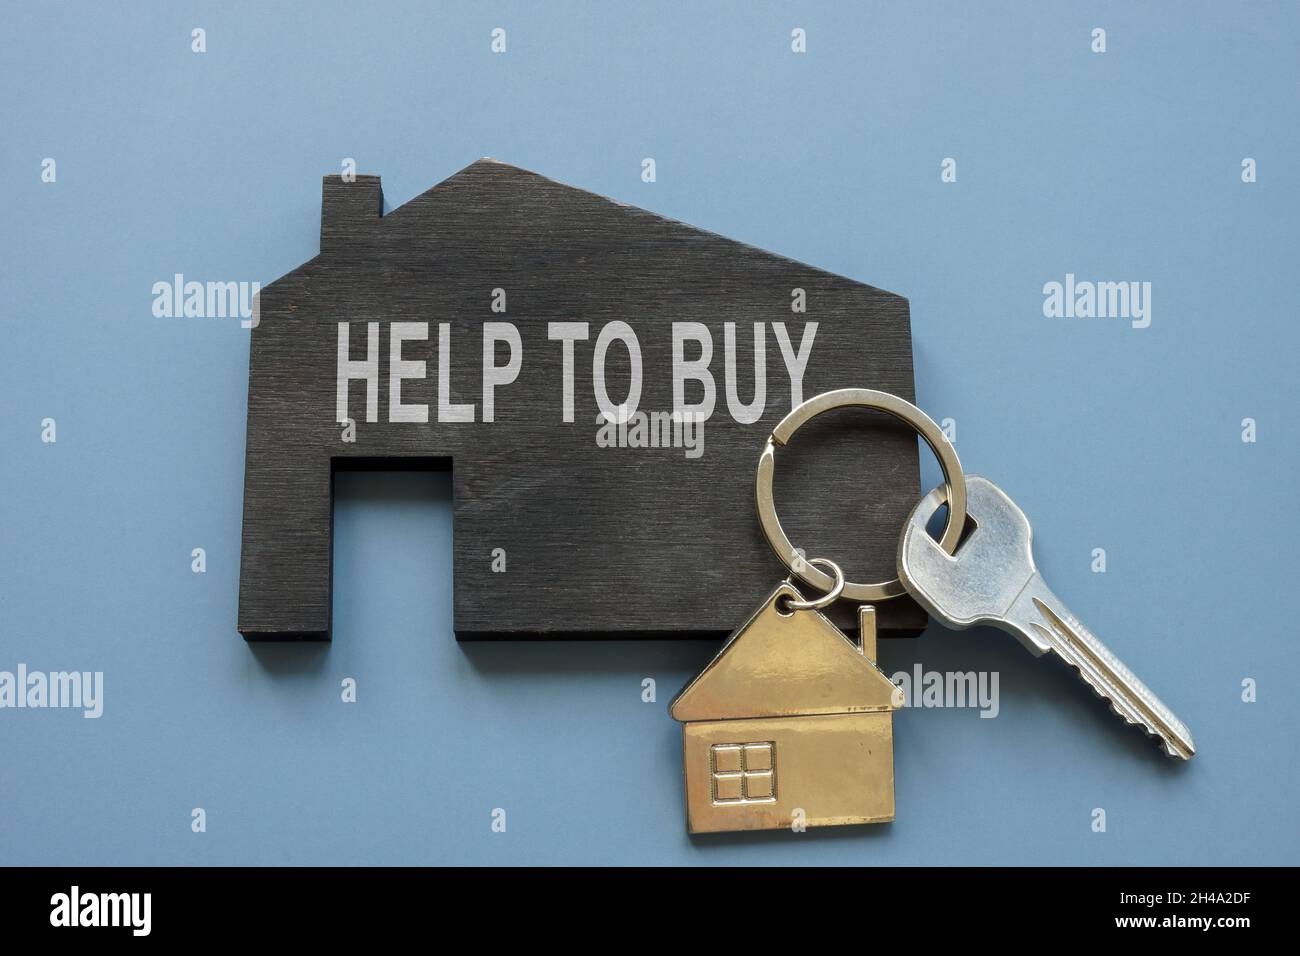 Home with phrase help to buy and real estate key. Stock Photo